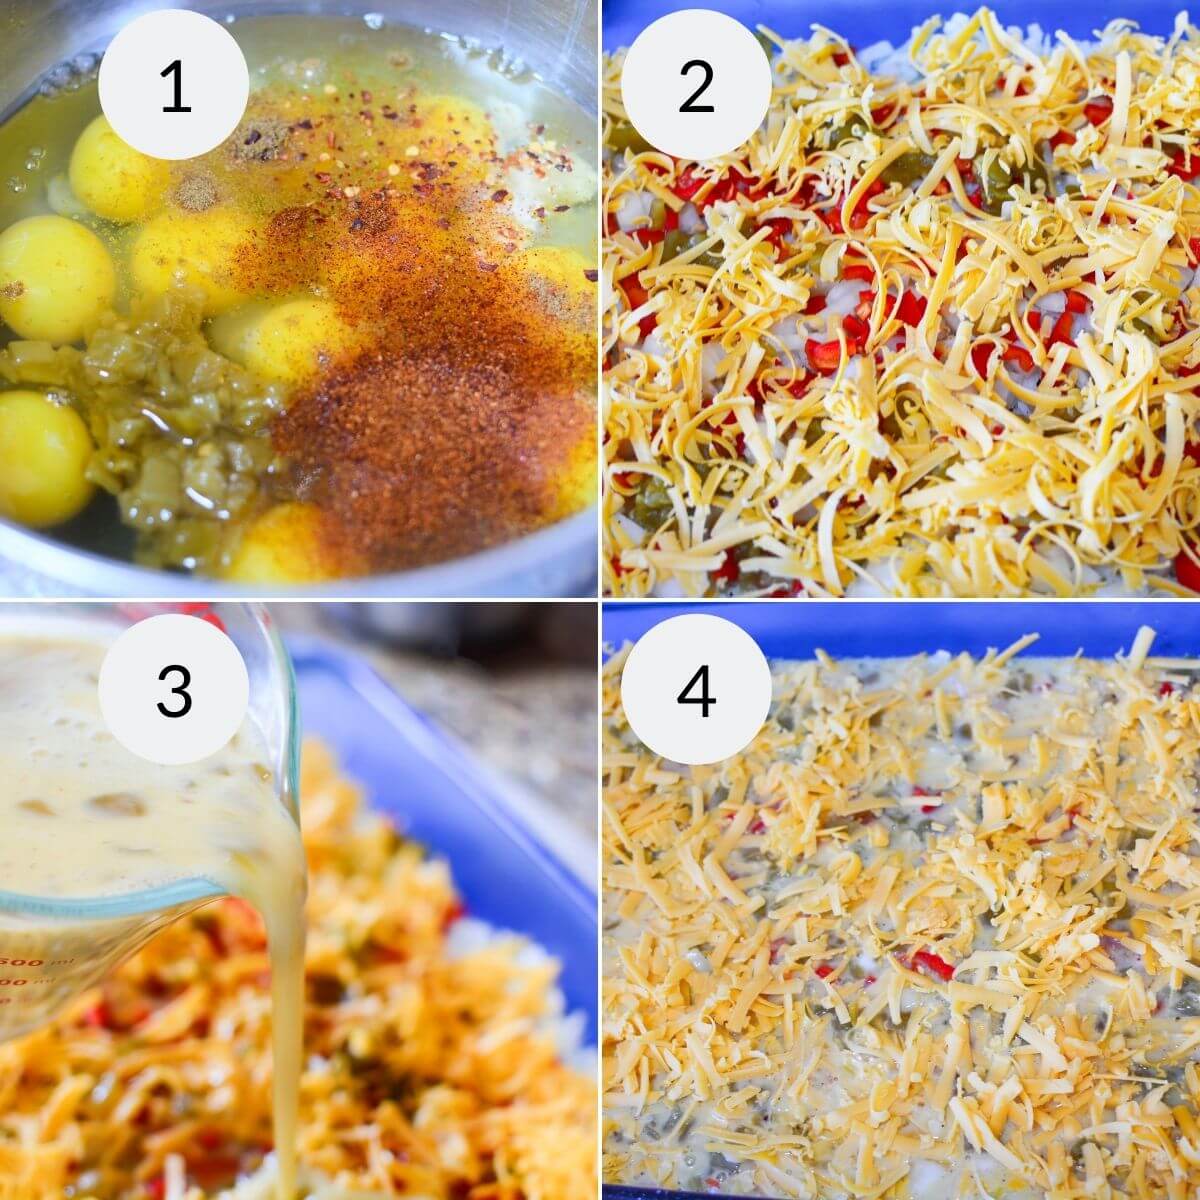 Four-step cooking process: 1) mixing eggs and spices in a bowl, 2) adding shredded cheese to a dish of ingredients, 3) pouring liquid mixture into the dish, 4